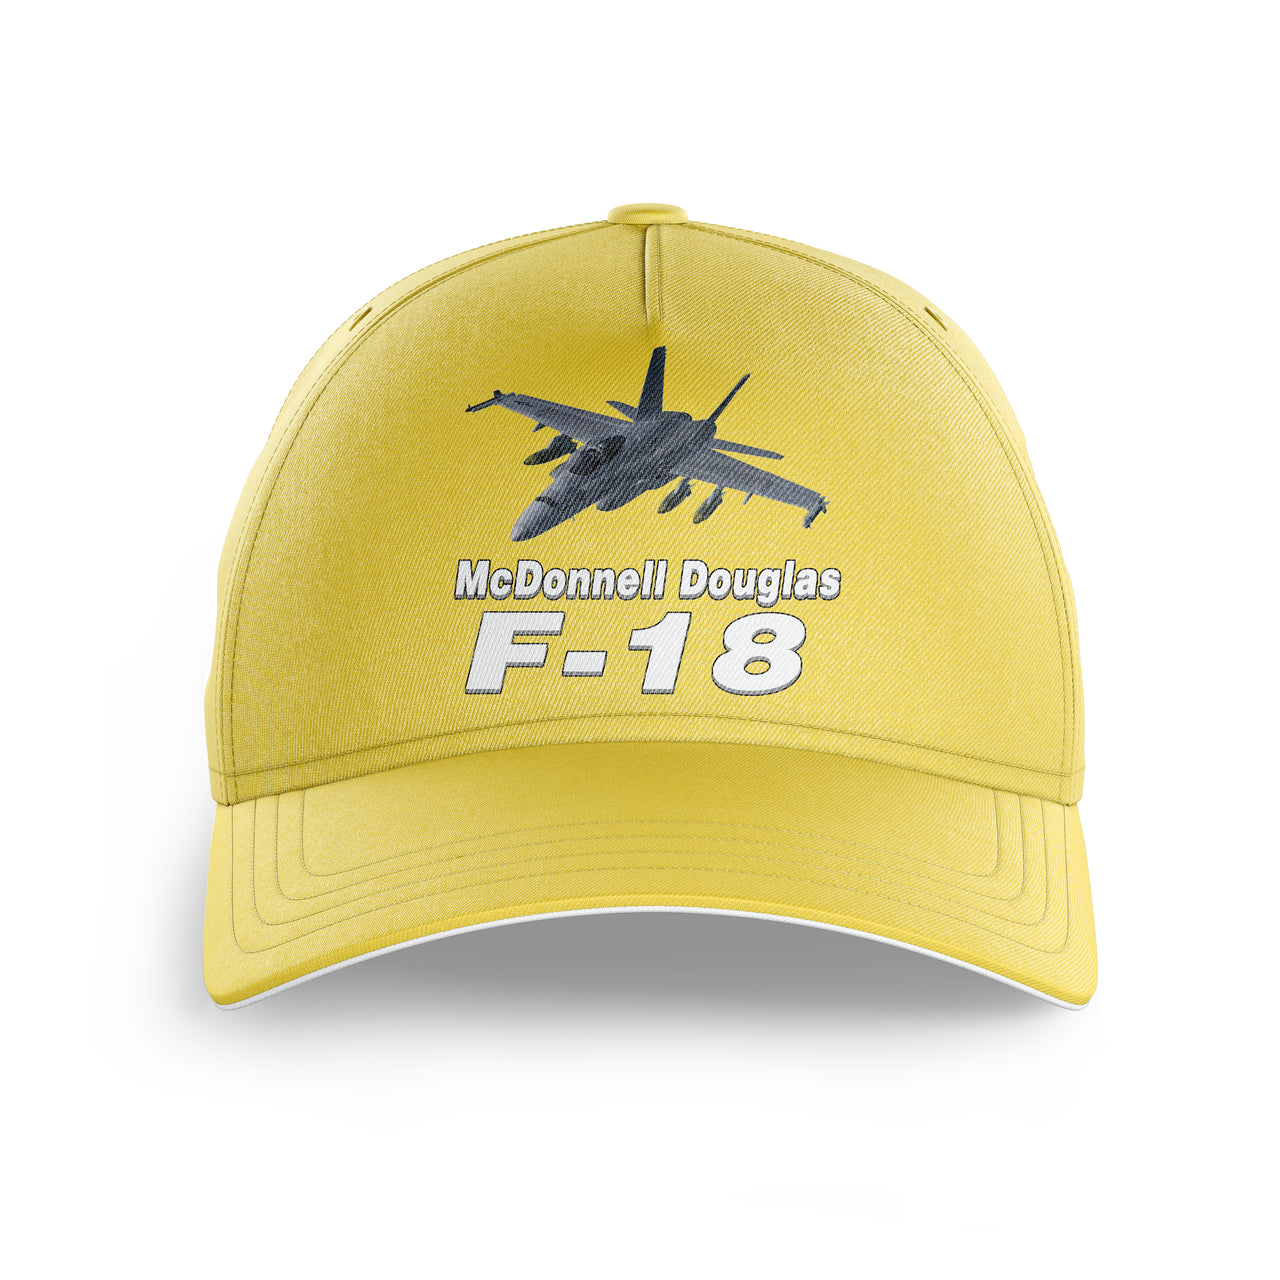 The McDonnell Douglas F18 Printed Hats